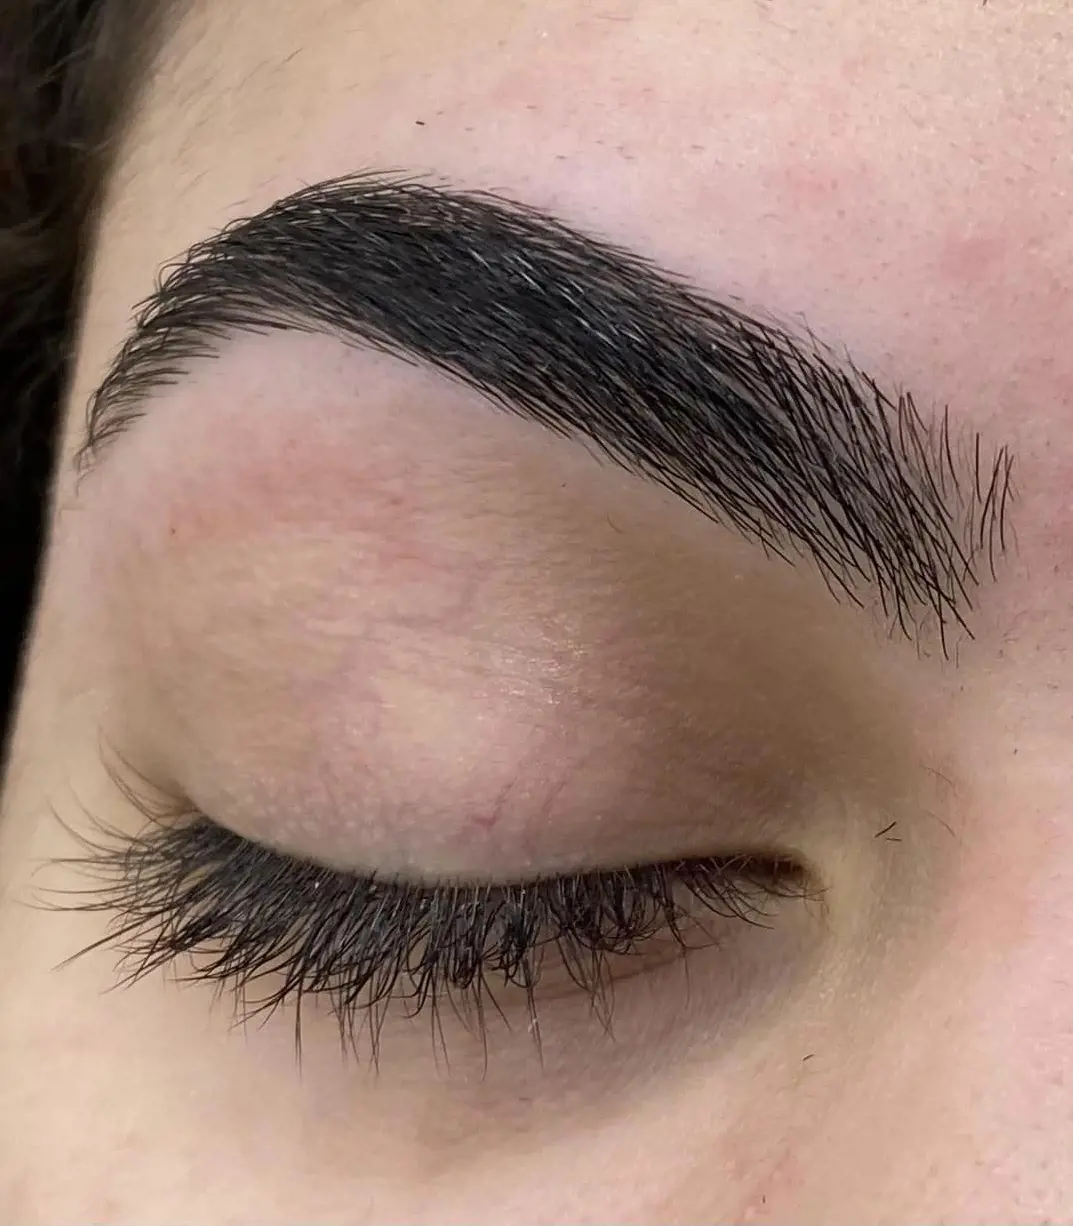 Threading and waxing charge similar costs, so you can choose the hair removal technique as per your ease